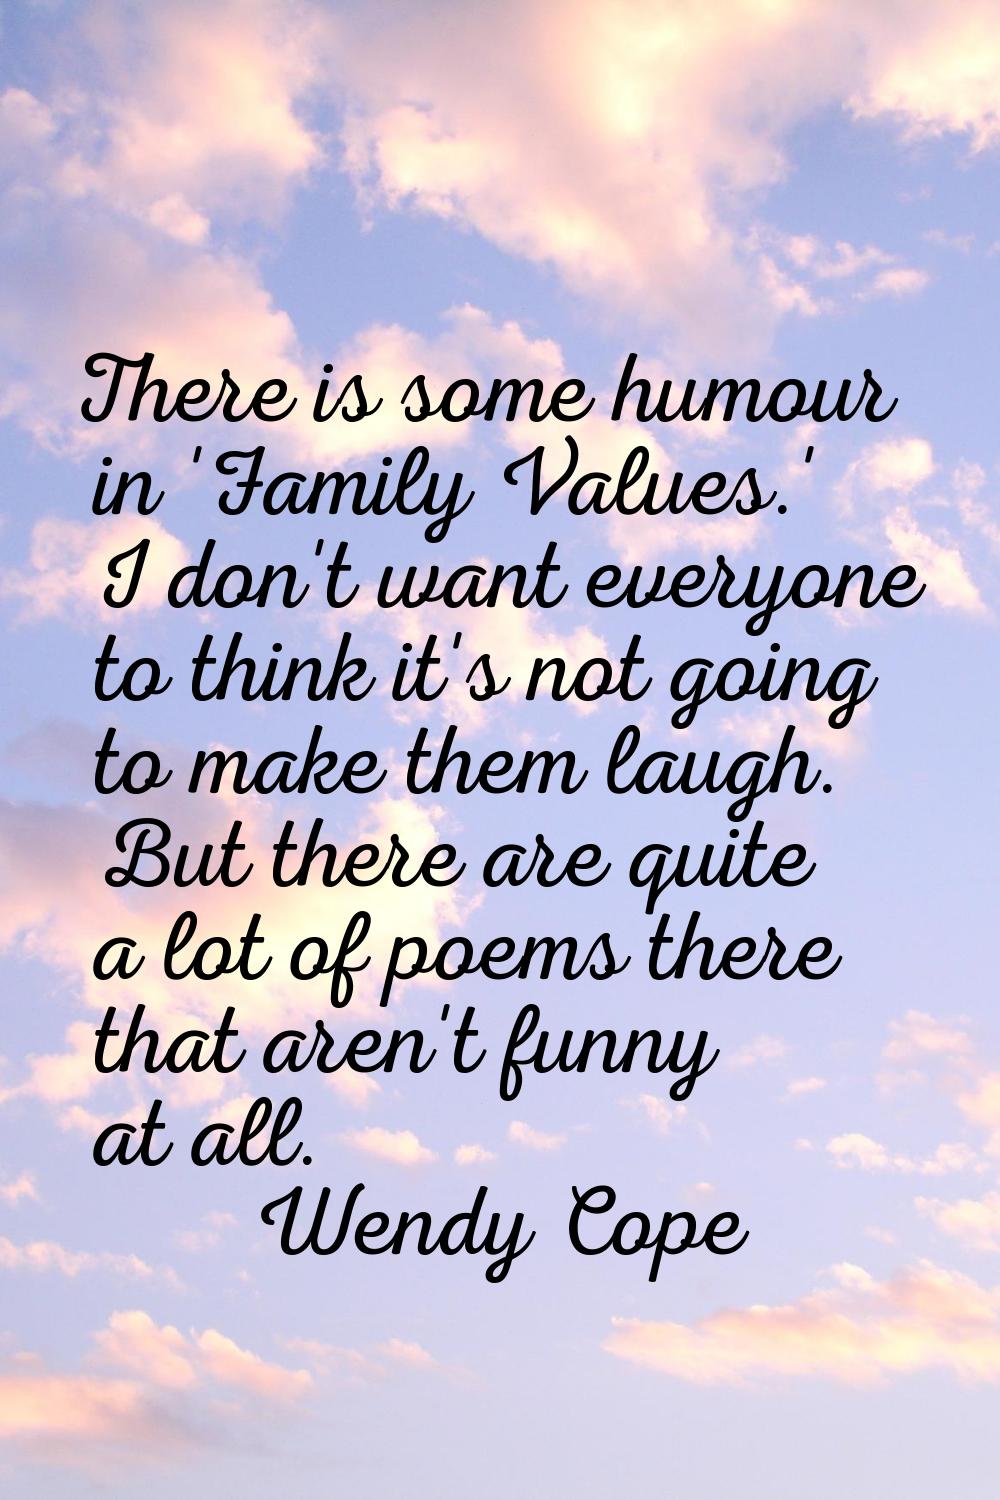 There is some humour in 'Family Values.' I don't want everyone to think it's not going to make them